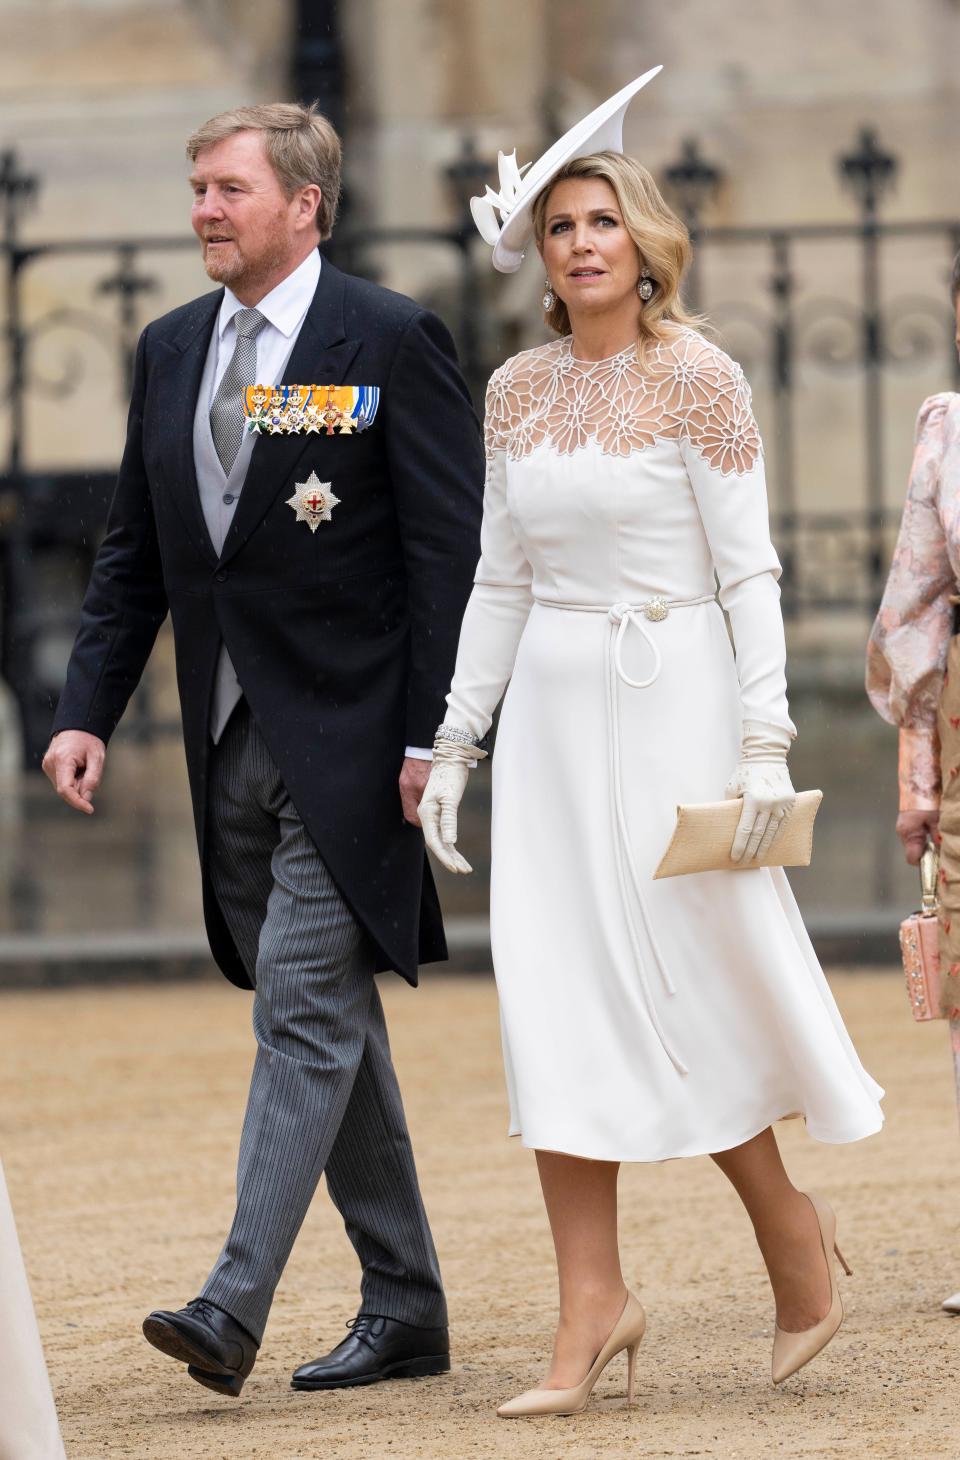 Queen Maxima of the Netherlands and King Willem-Alexander of the Netherlands at Westminster Abbey during the Coronation of King Charles III and Queen Camilla on May 6, 2023 in London, England.